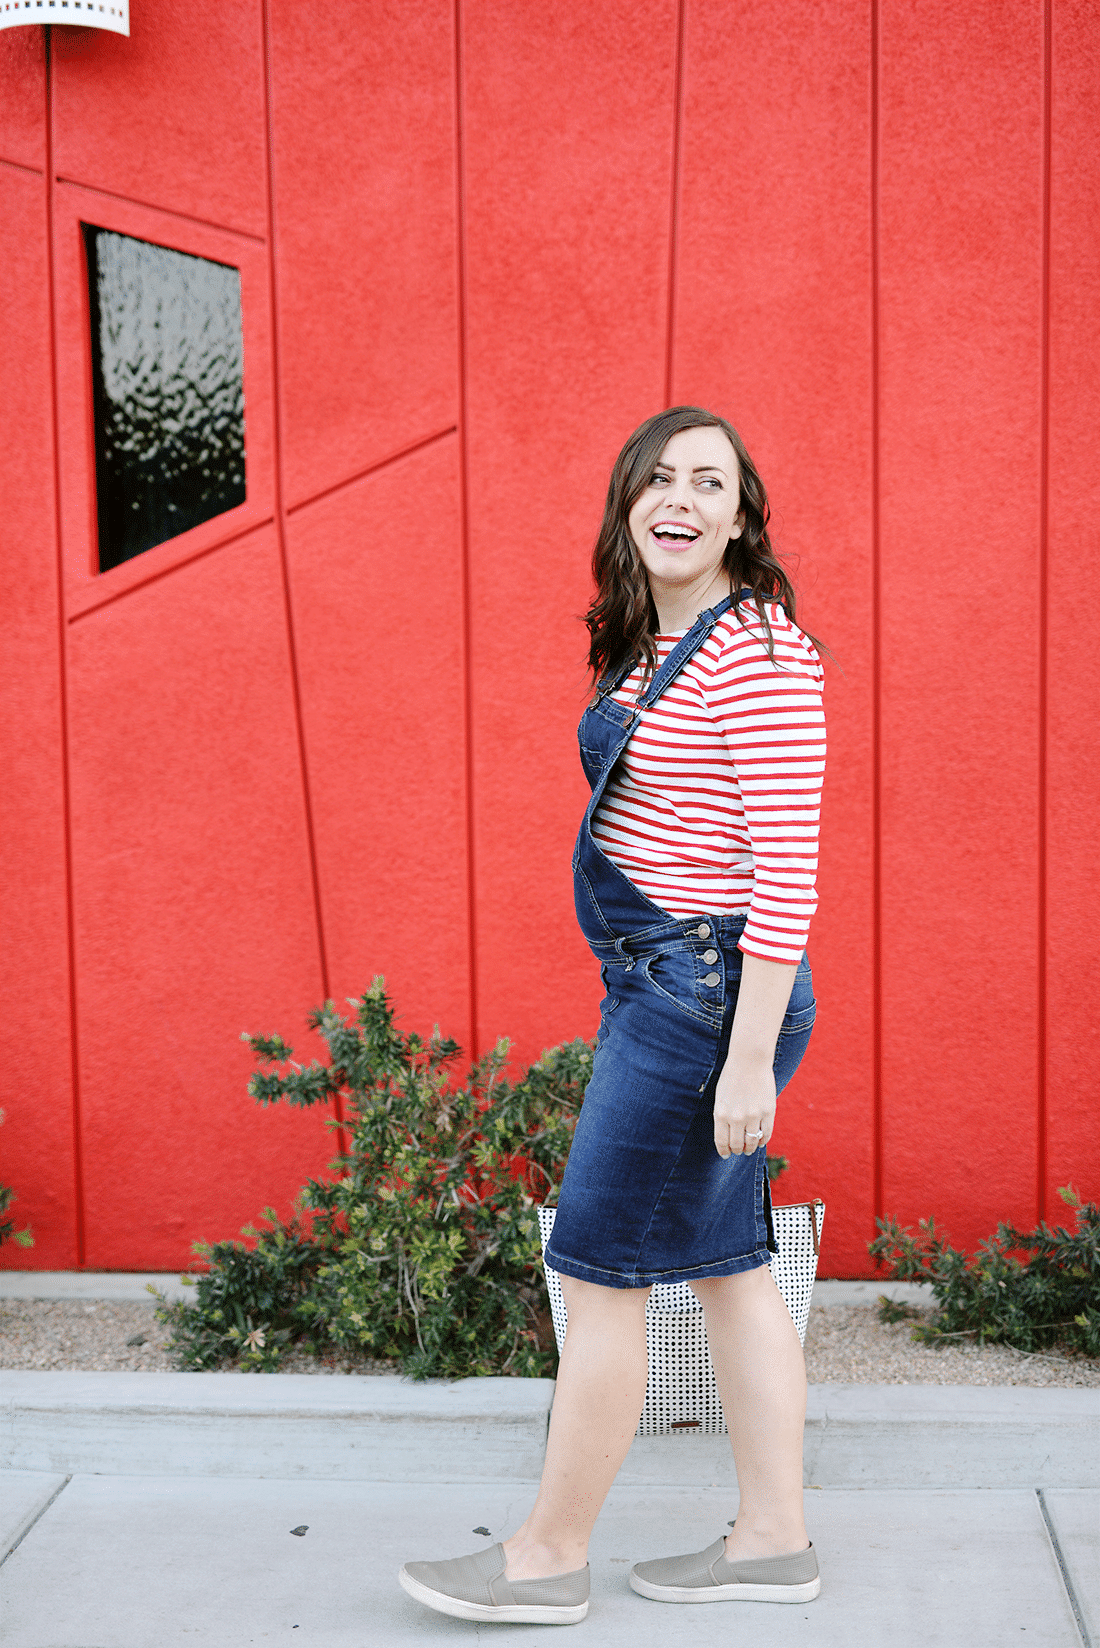 Pregnancy Overalls: The Trend to Rock